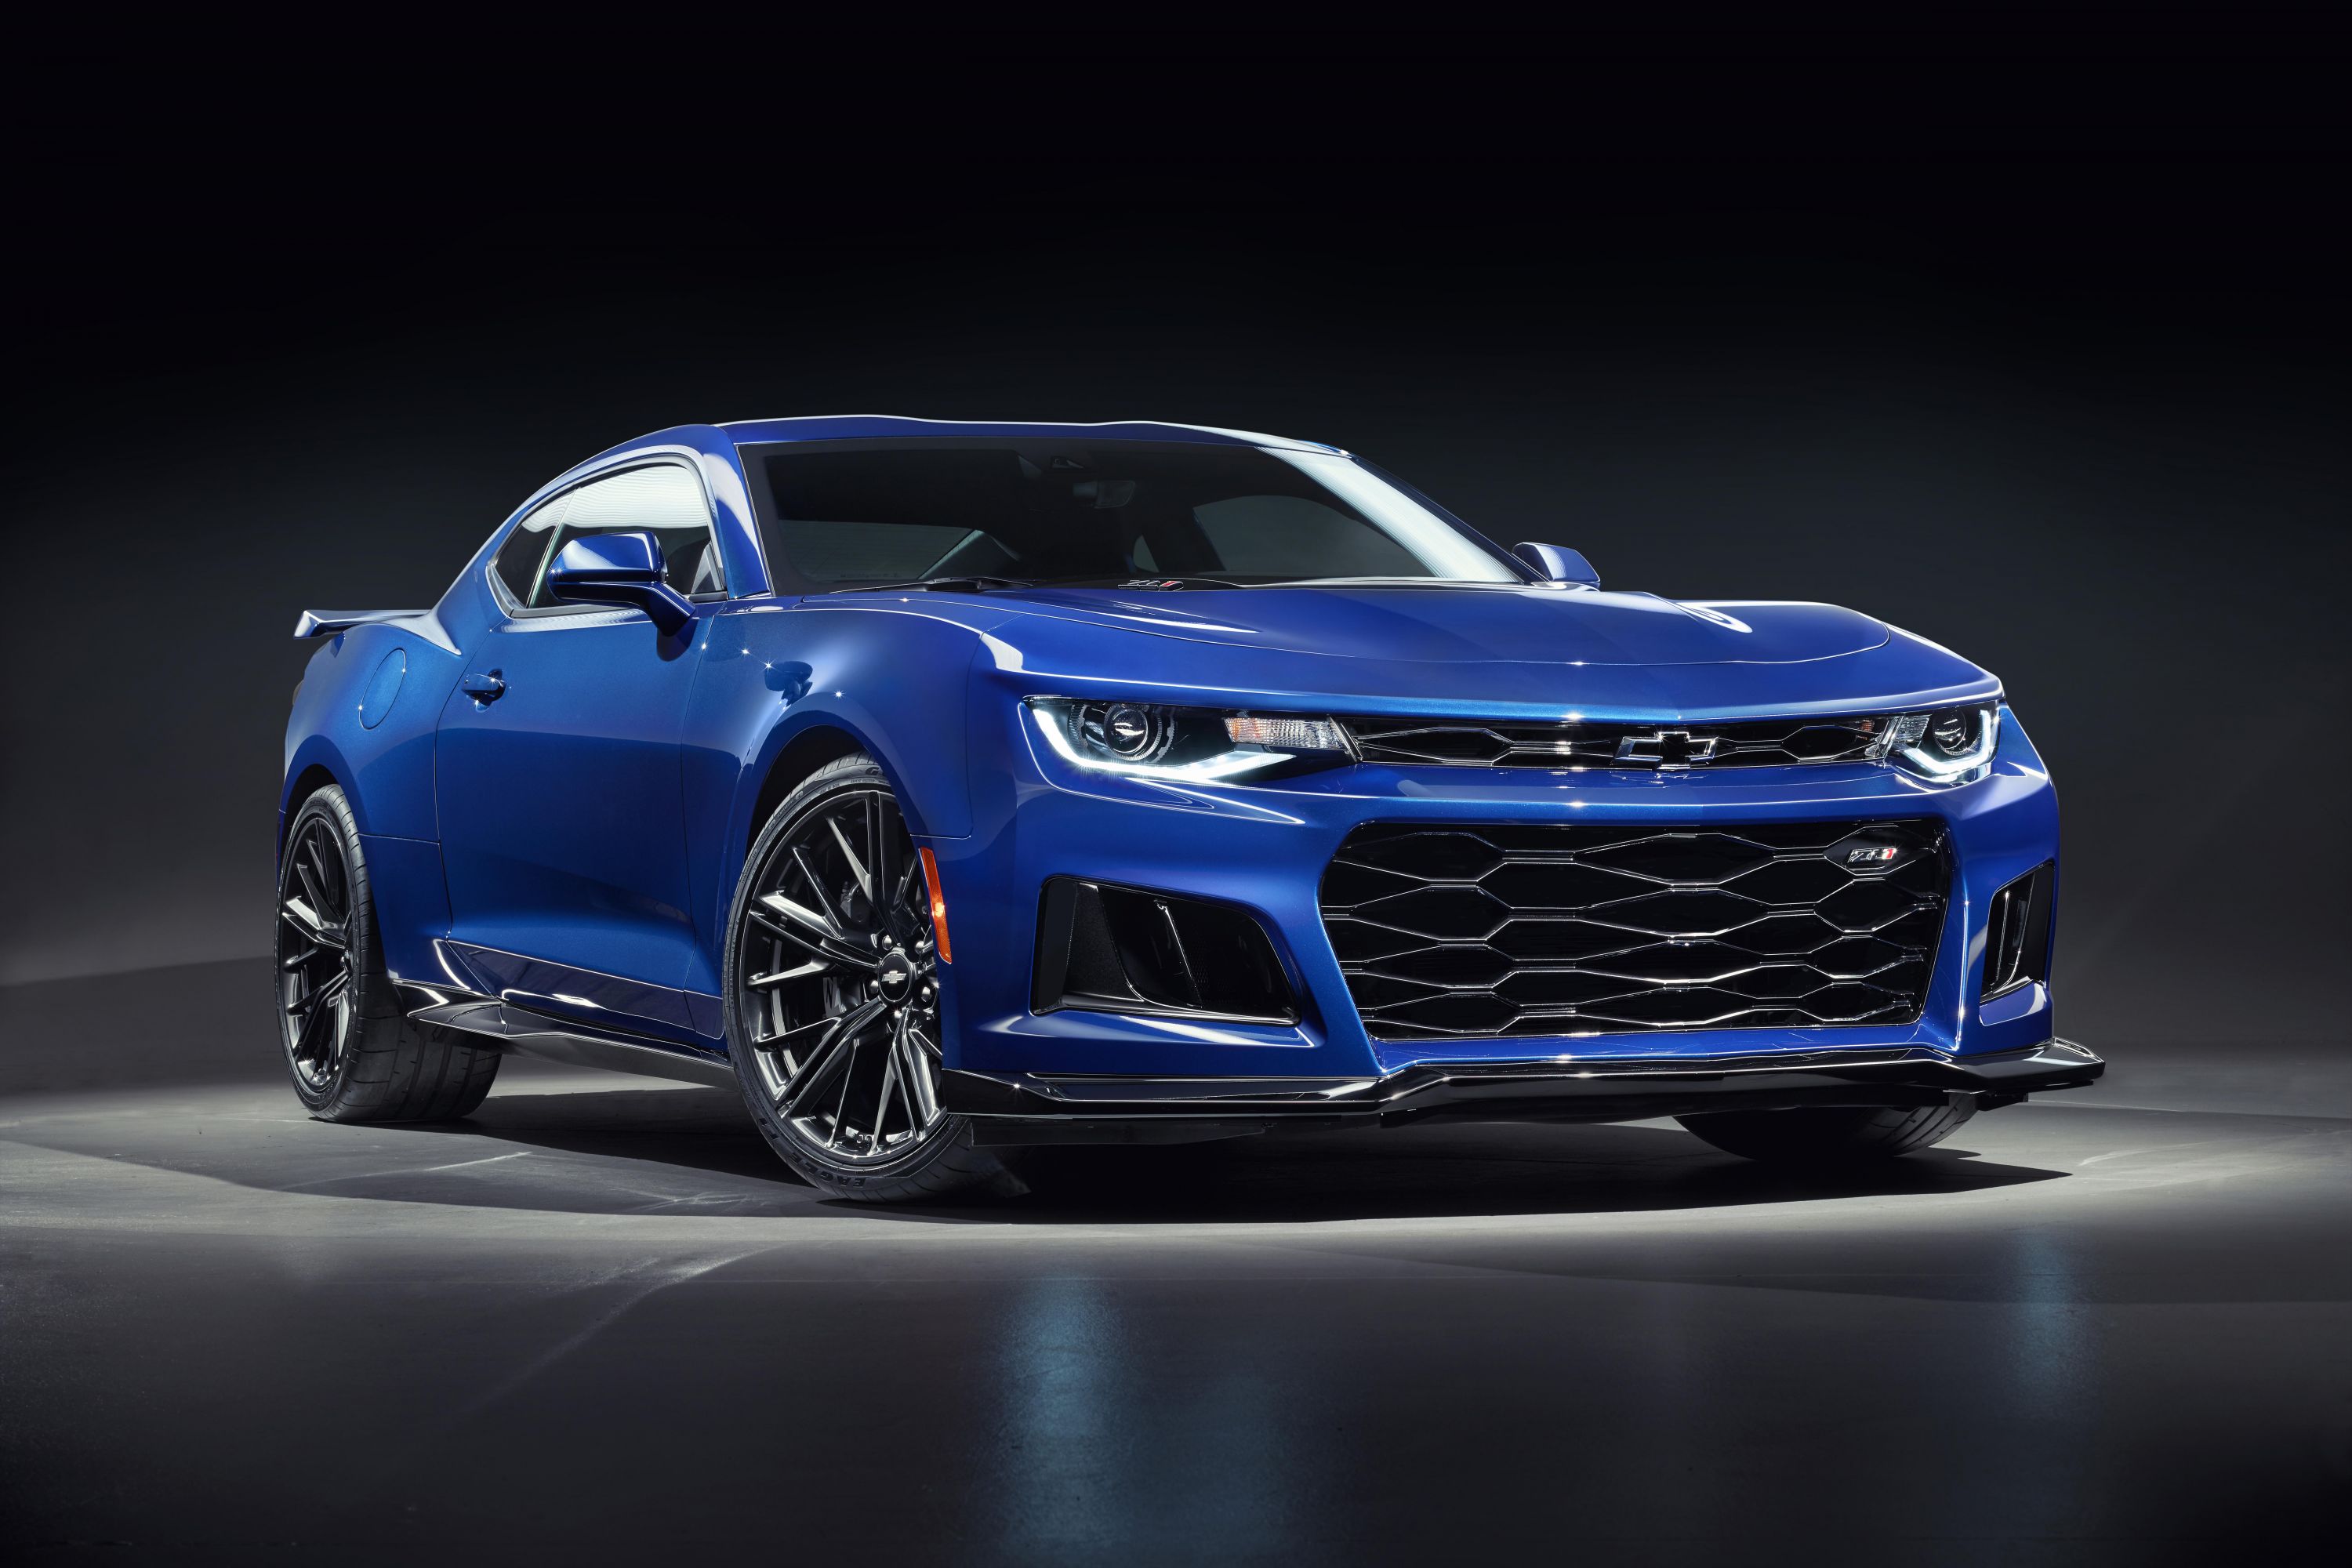 Chevrolet Camaro and Cadillac Escalade to gain new body styles report